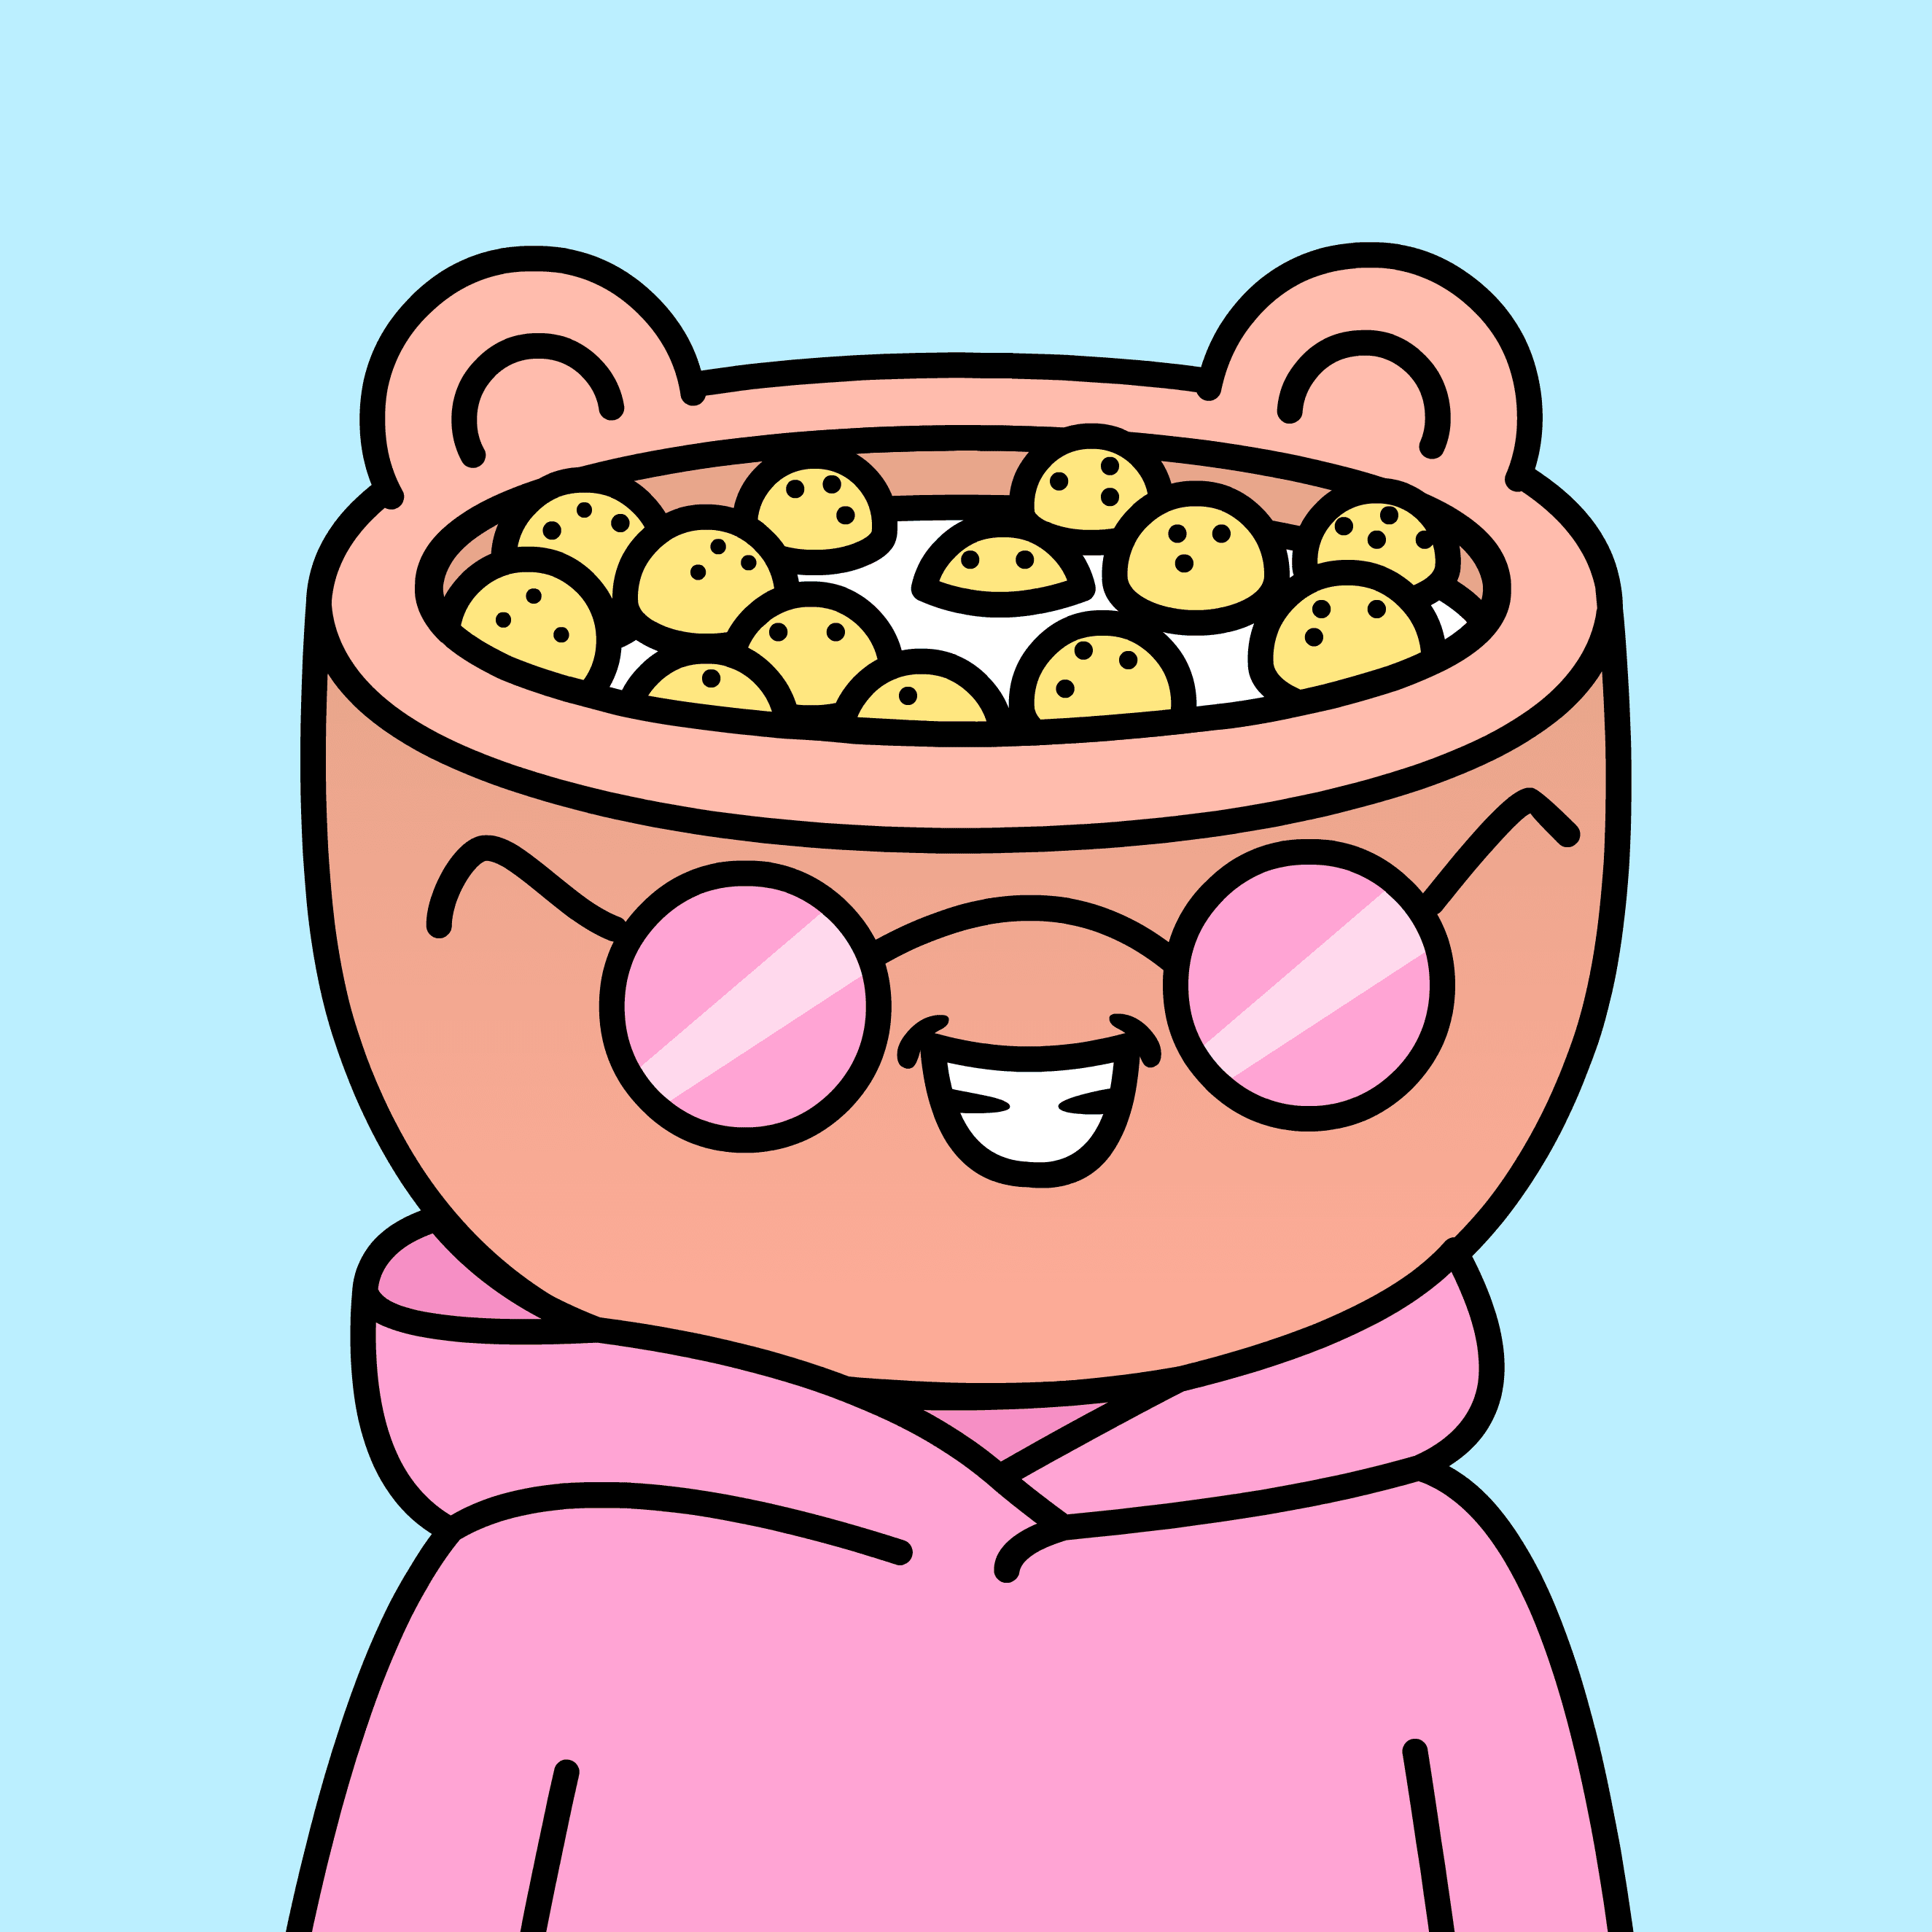 CEREAL #5293